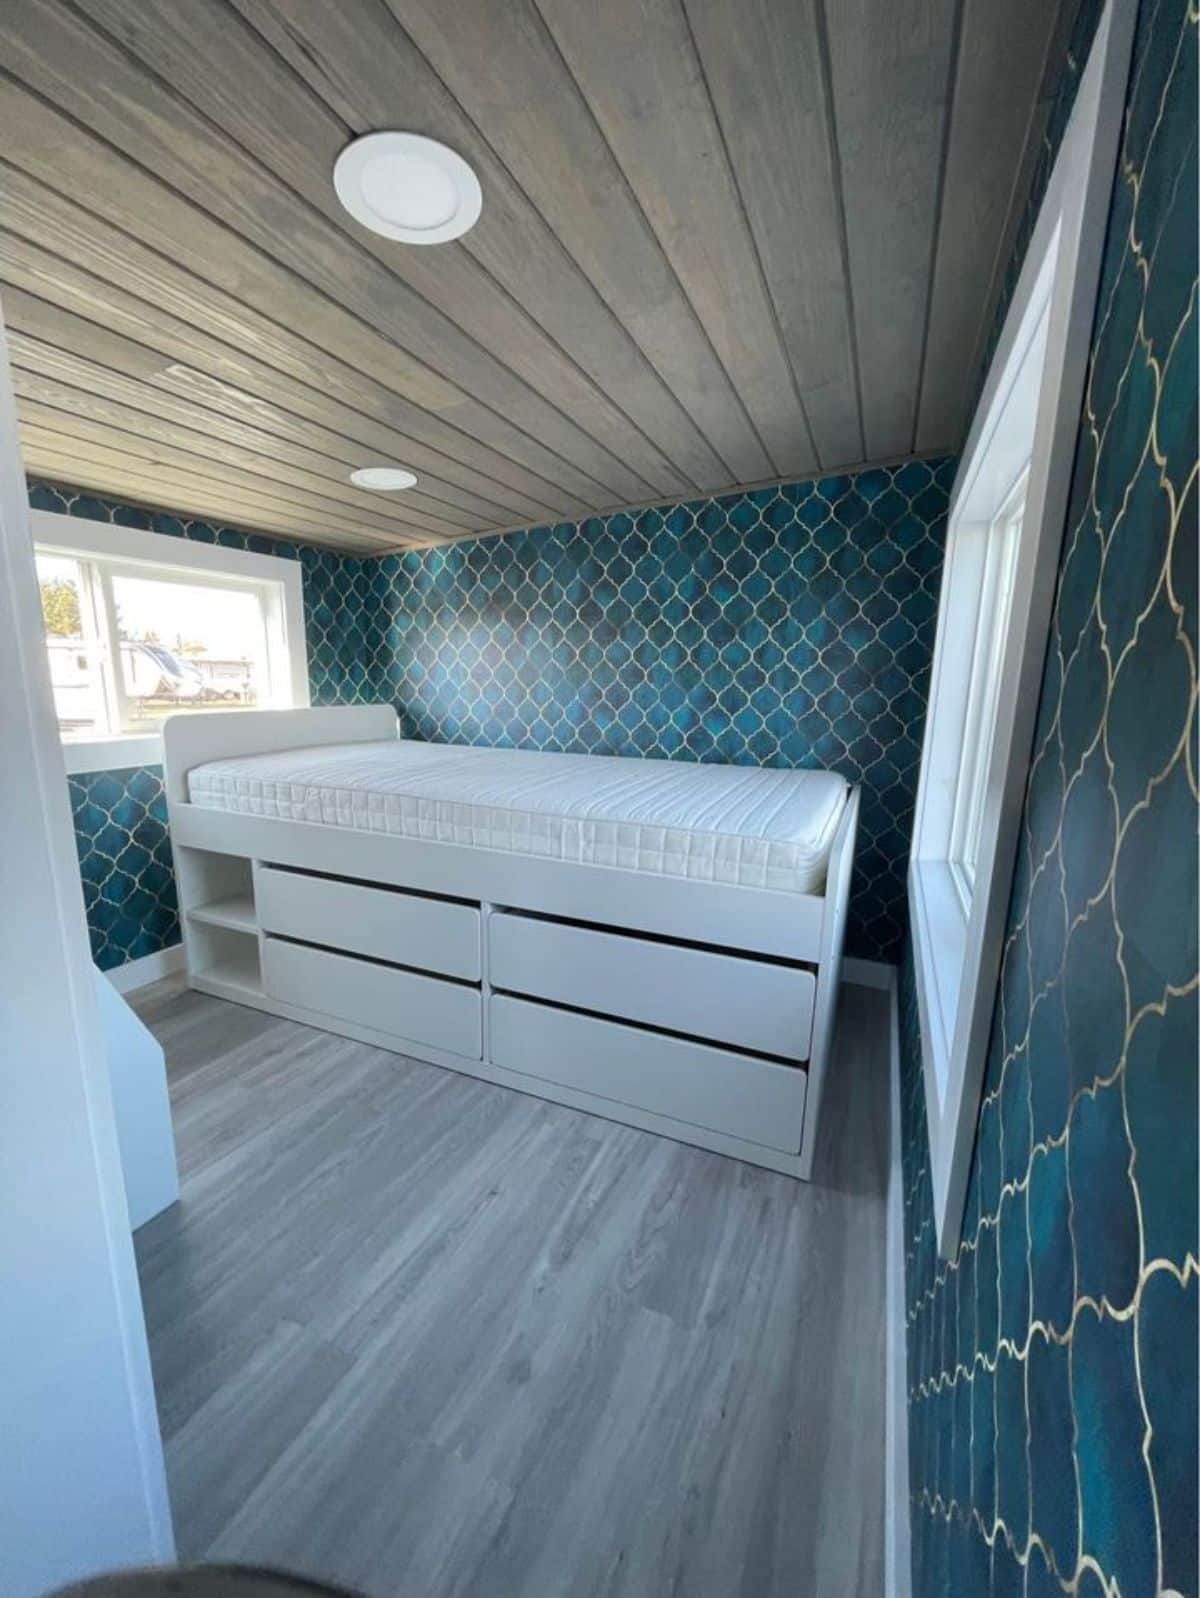 stylish and spacious bed in the bedroom of brand new gooseneck tiny house